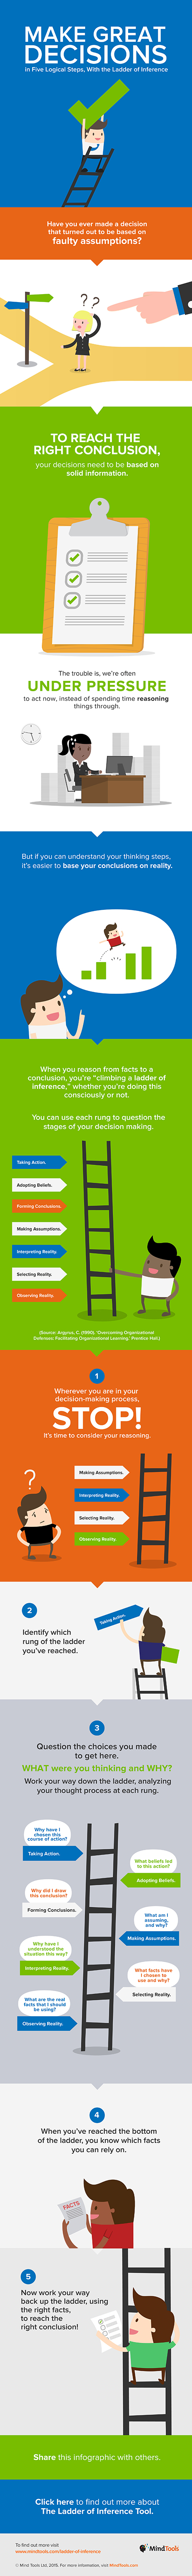 Ladder of Inference Infographic